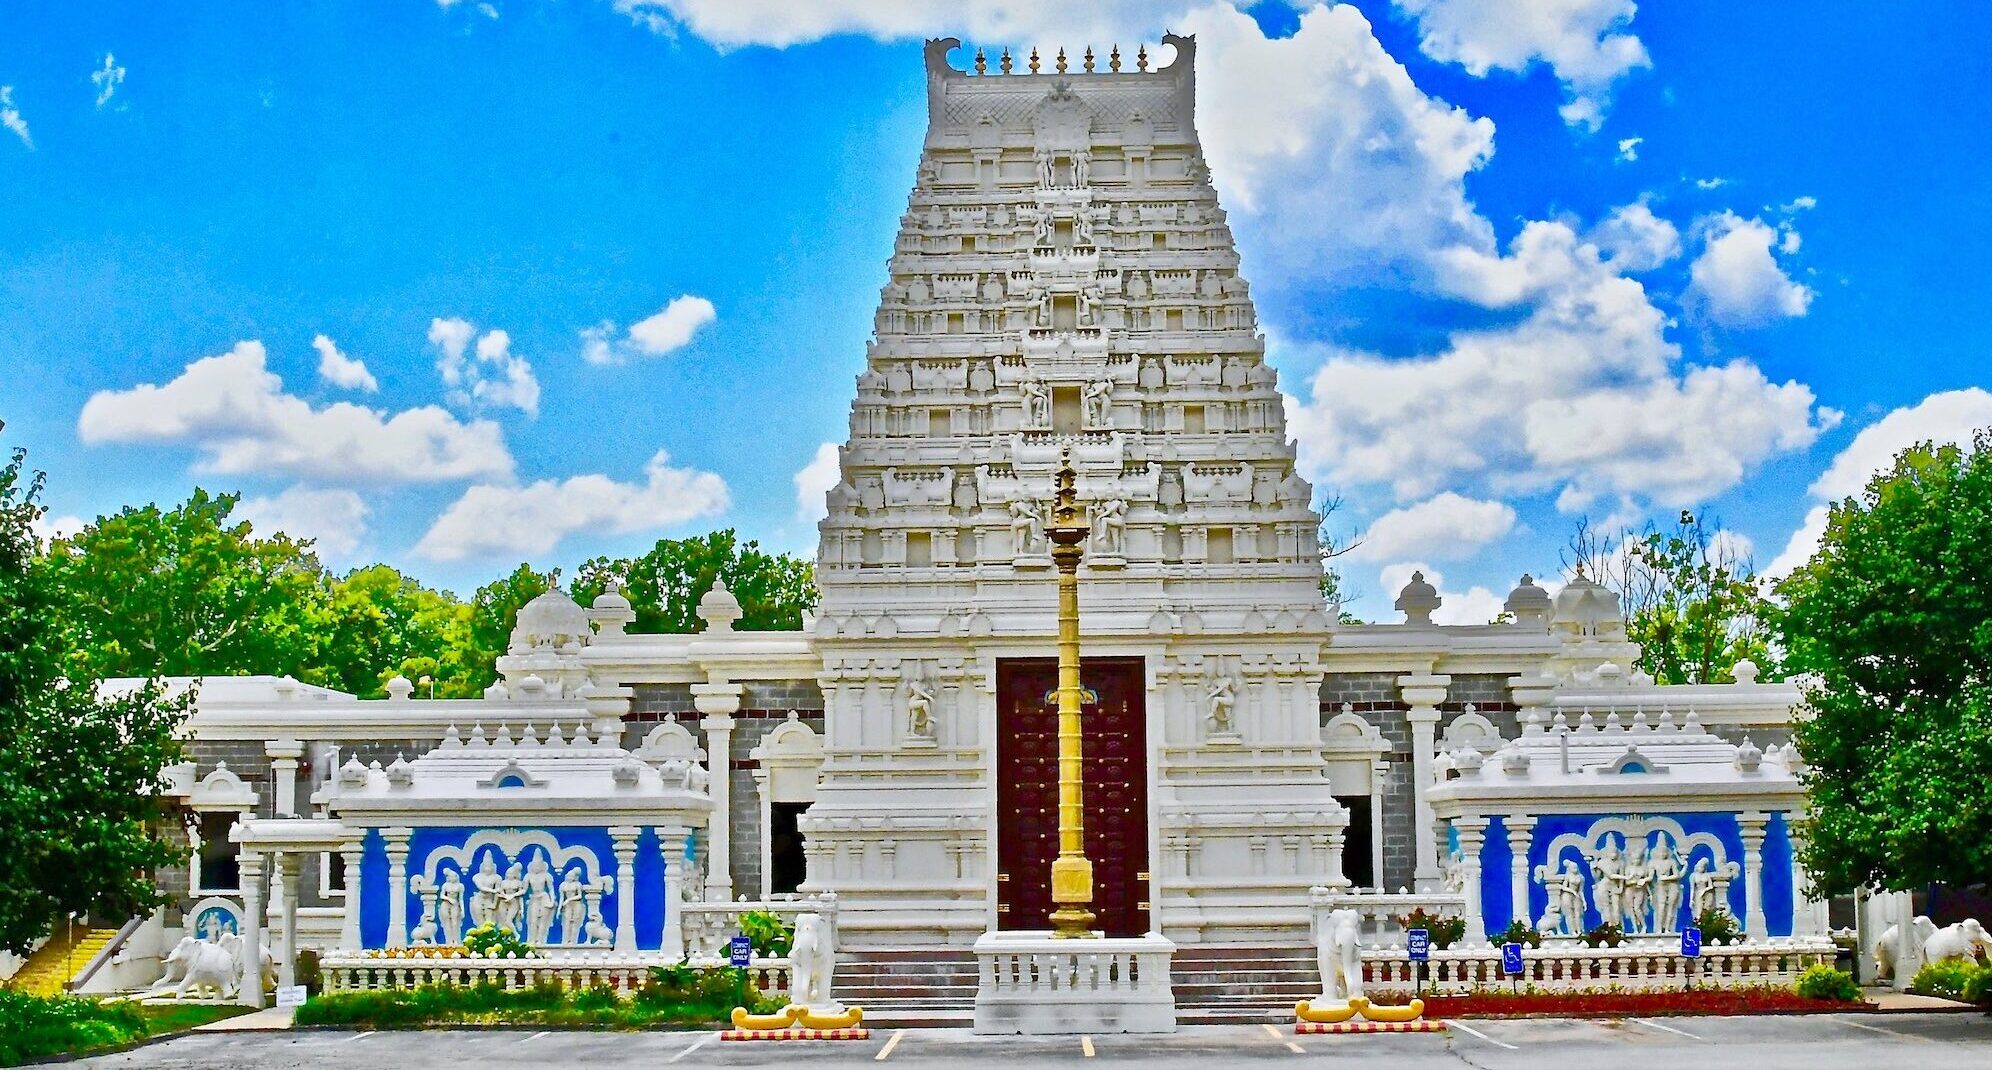 The Hindu Temple of St. Louis Temples Vibhaga